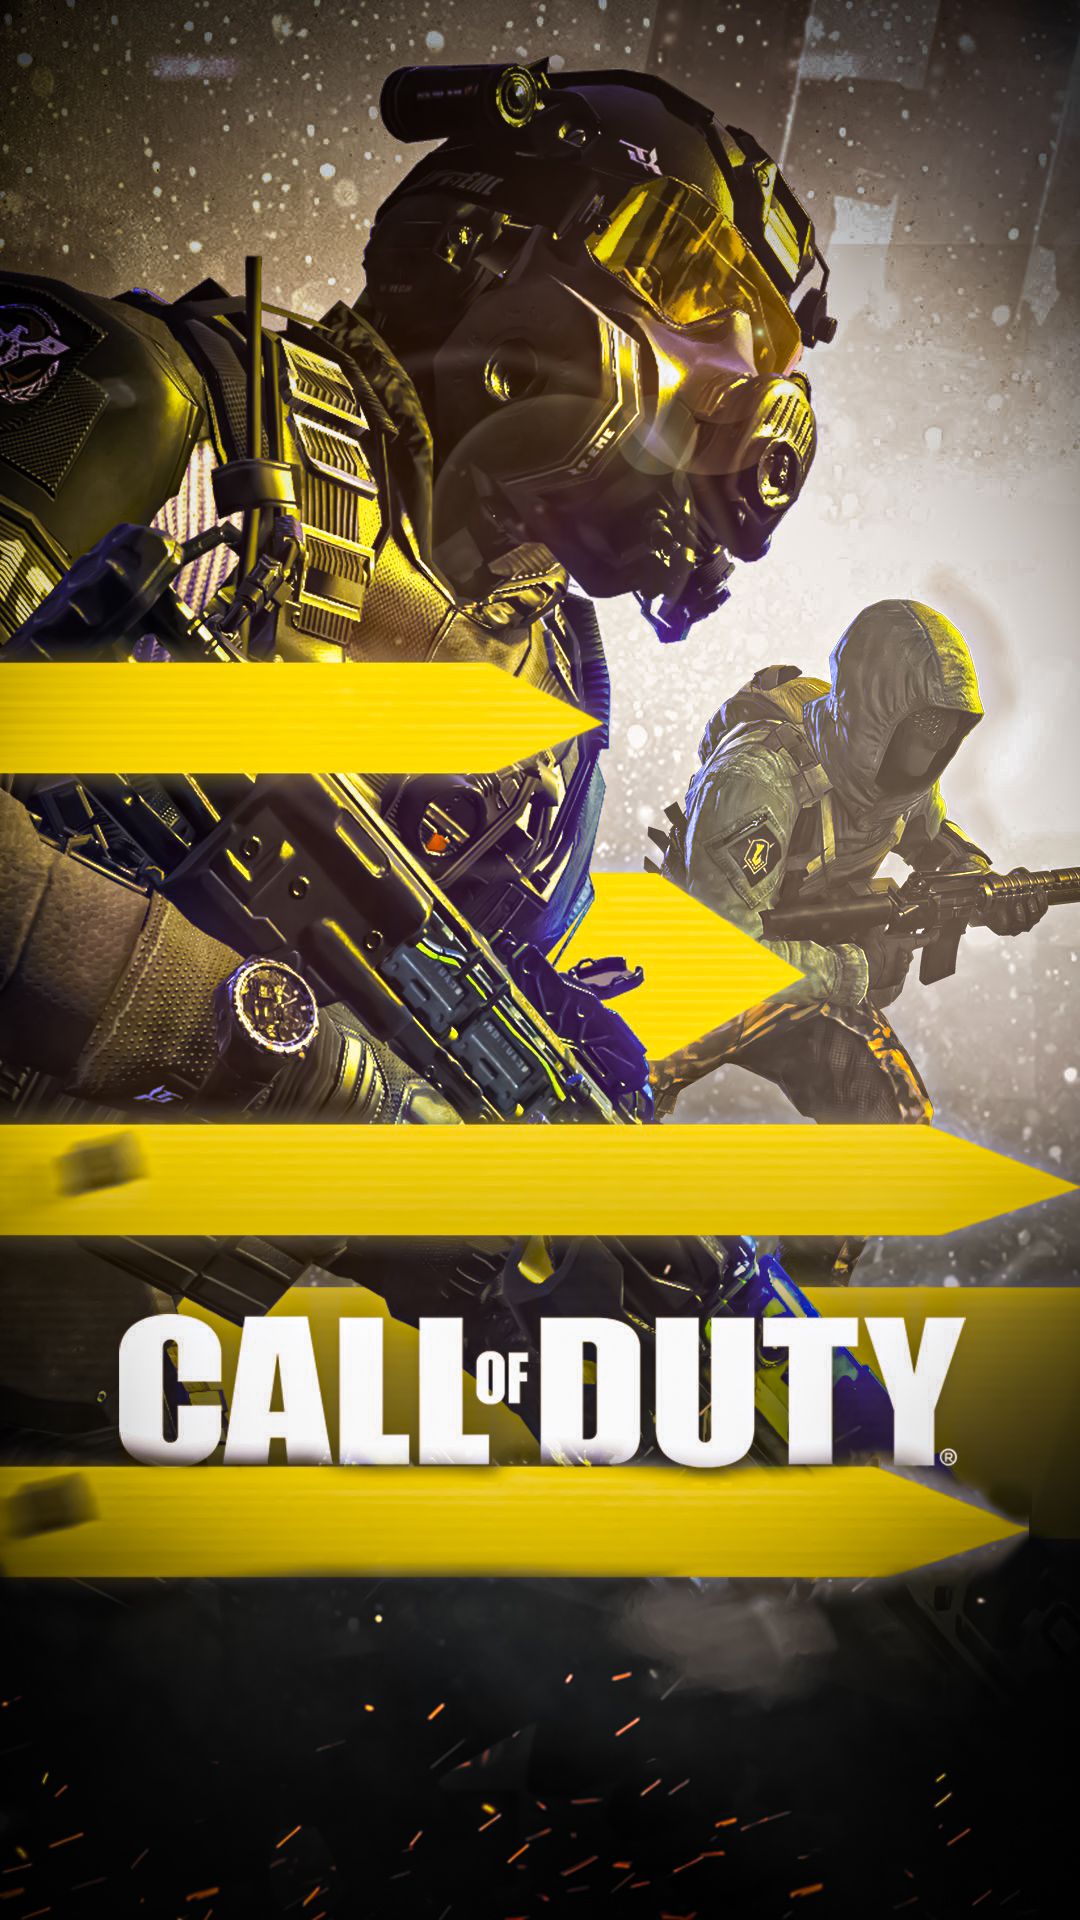 Call of Duty Mobile Wallpaper